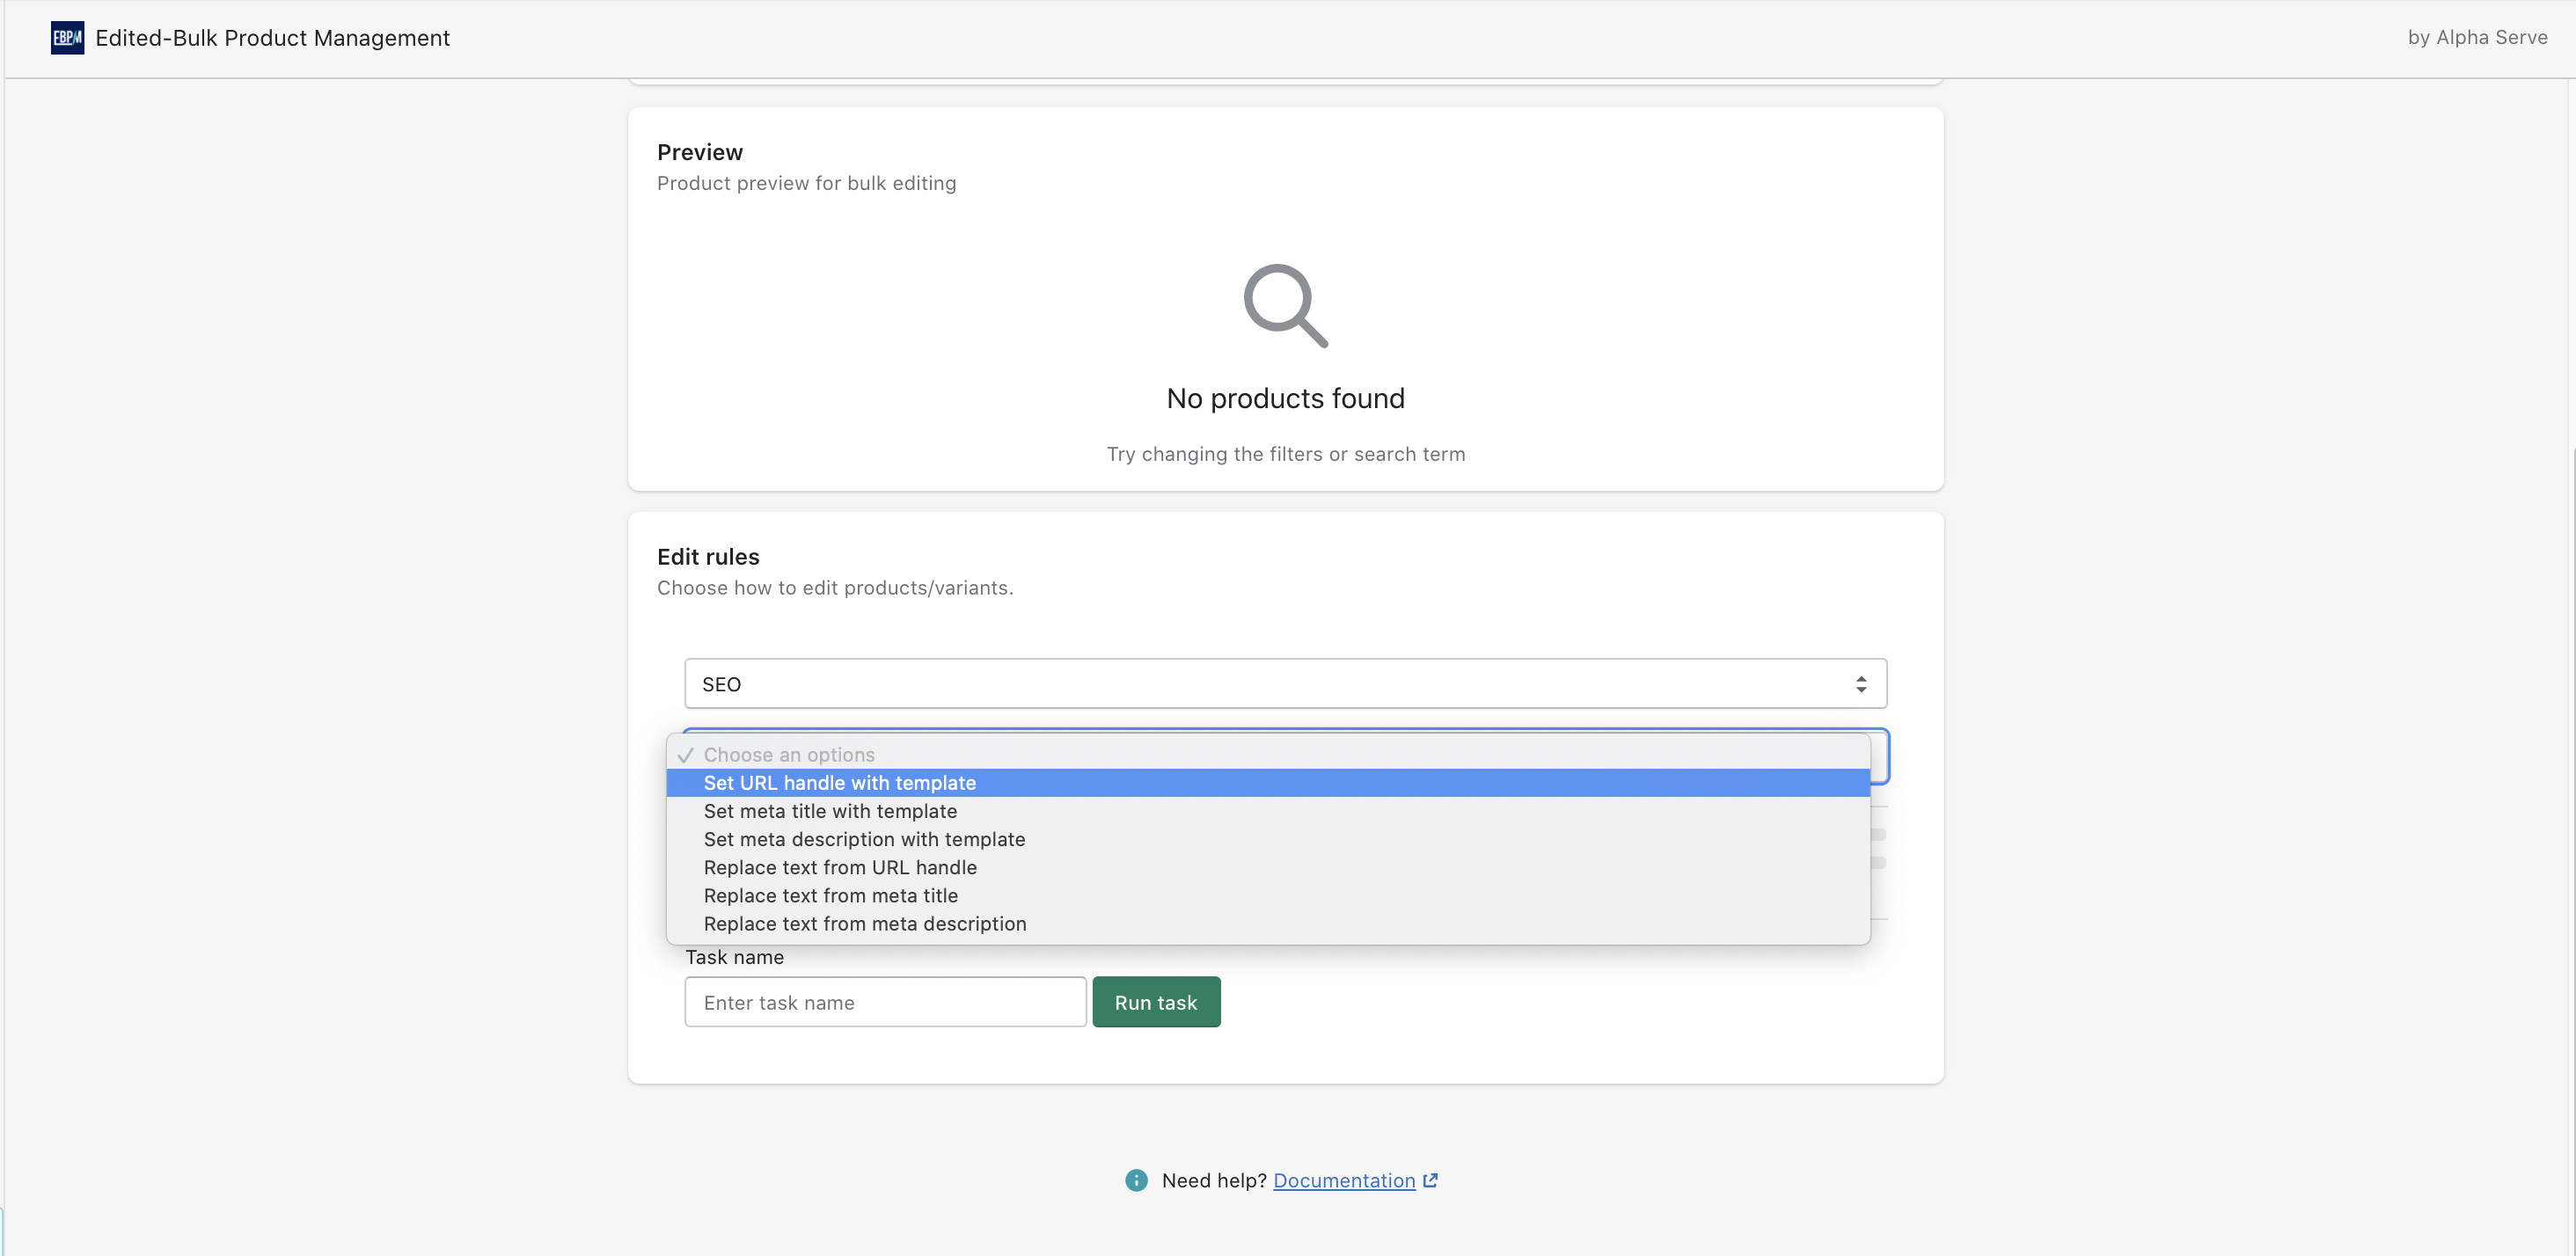 Edited - Bulk Product Management preview
